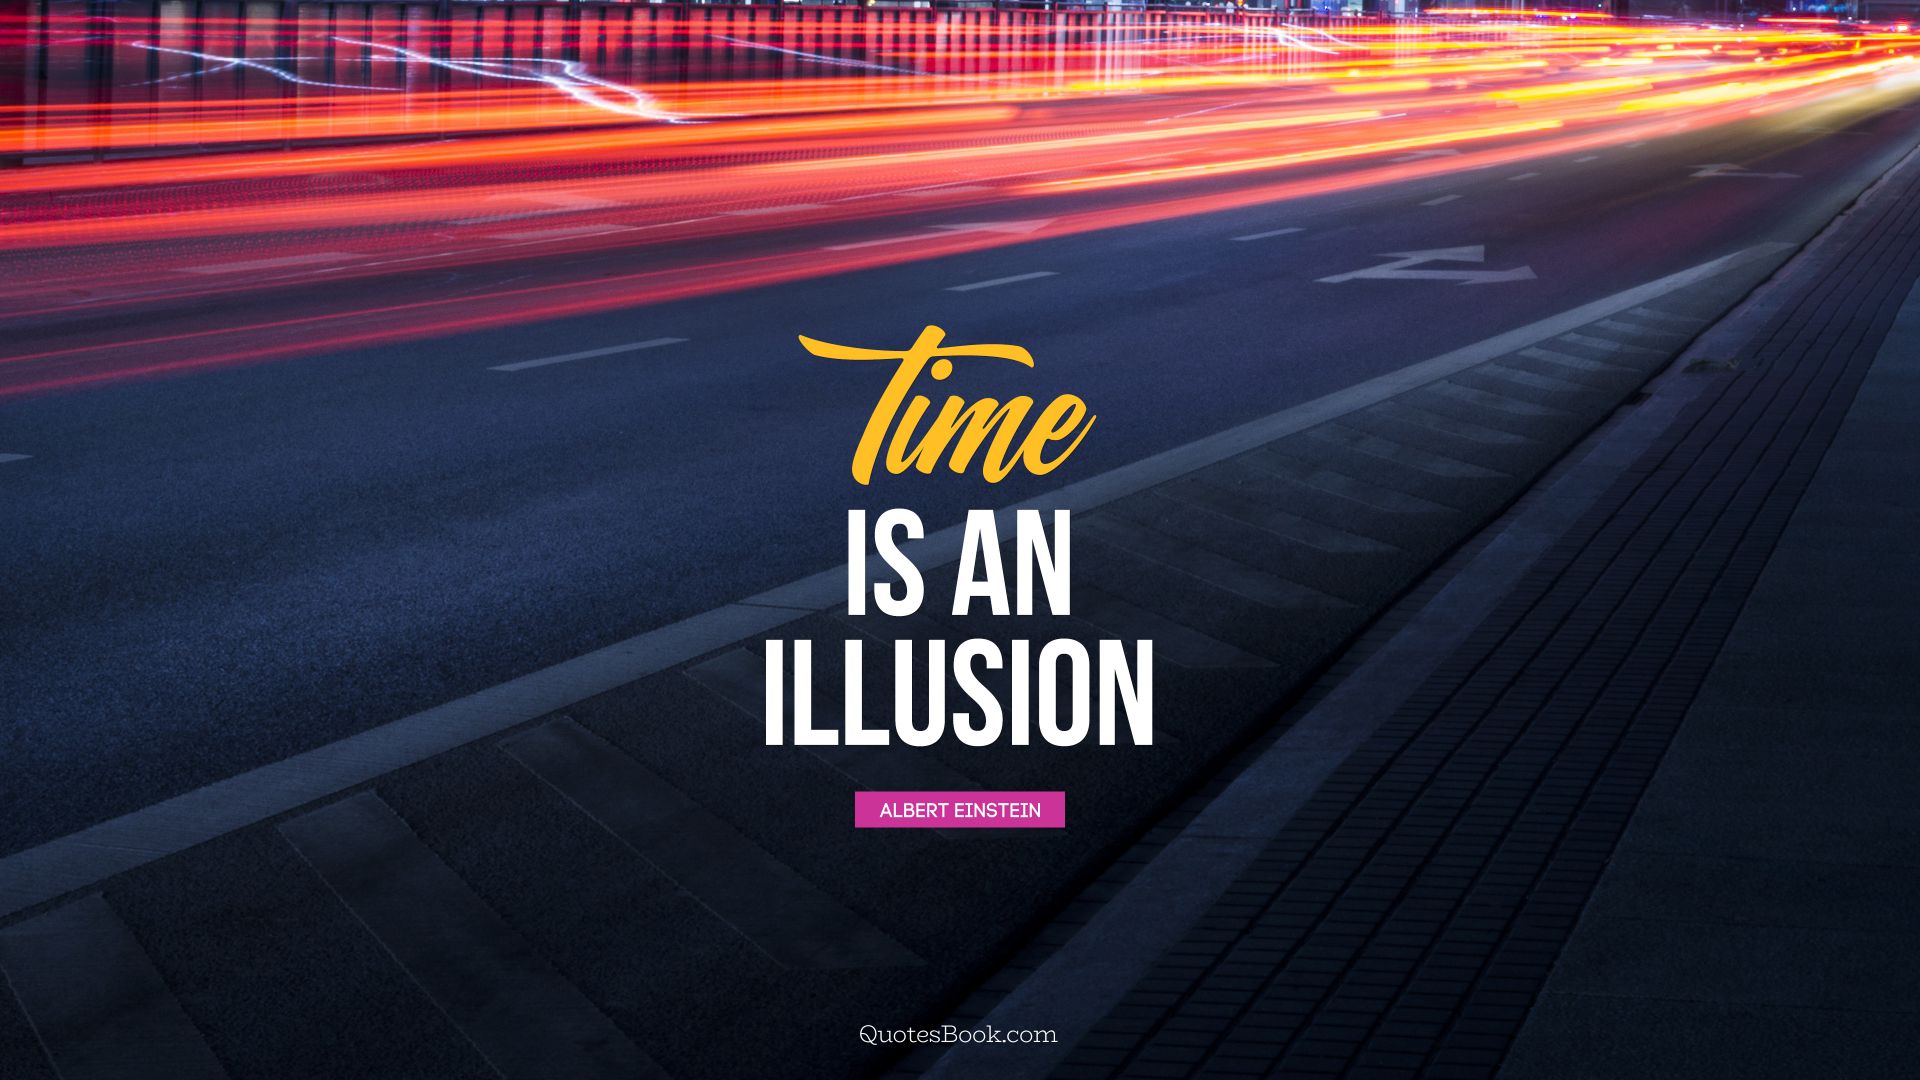 Time is an illusion. - Quote by Albert Einstein